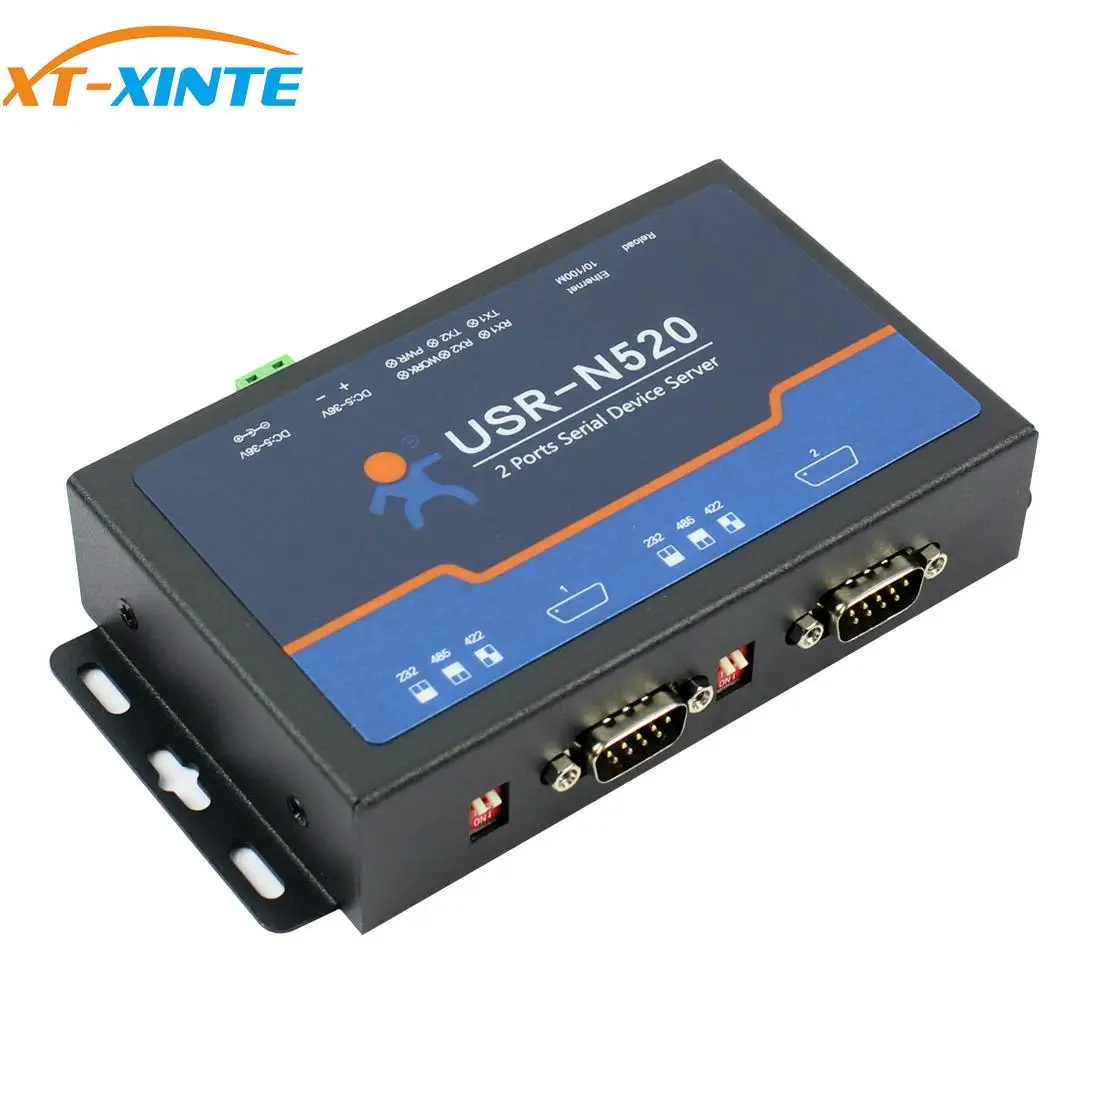 

USRIOT USR-N520 Serial to Ethernet Server TCP IP Converter Double Serial Device RS232 RS485 RS422 Multi-host Polling